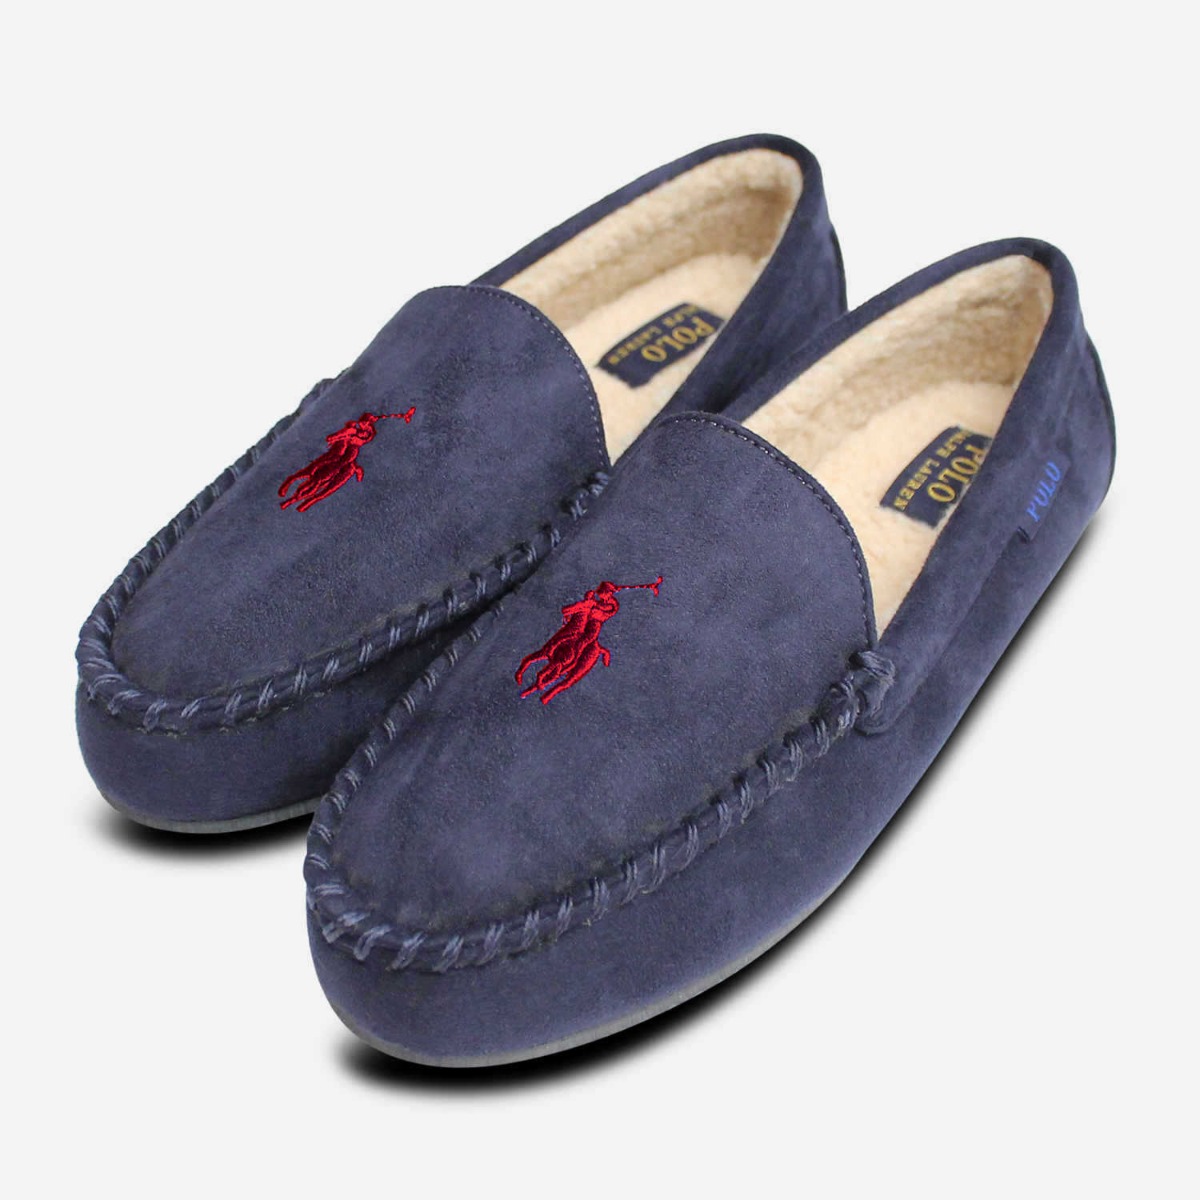 Ralph Lauren Polo Navy Blue Mens Slippers with Warm Lining | eBay